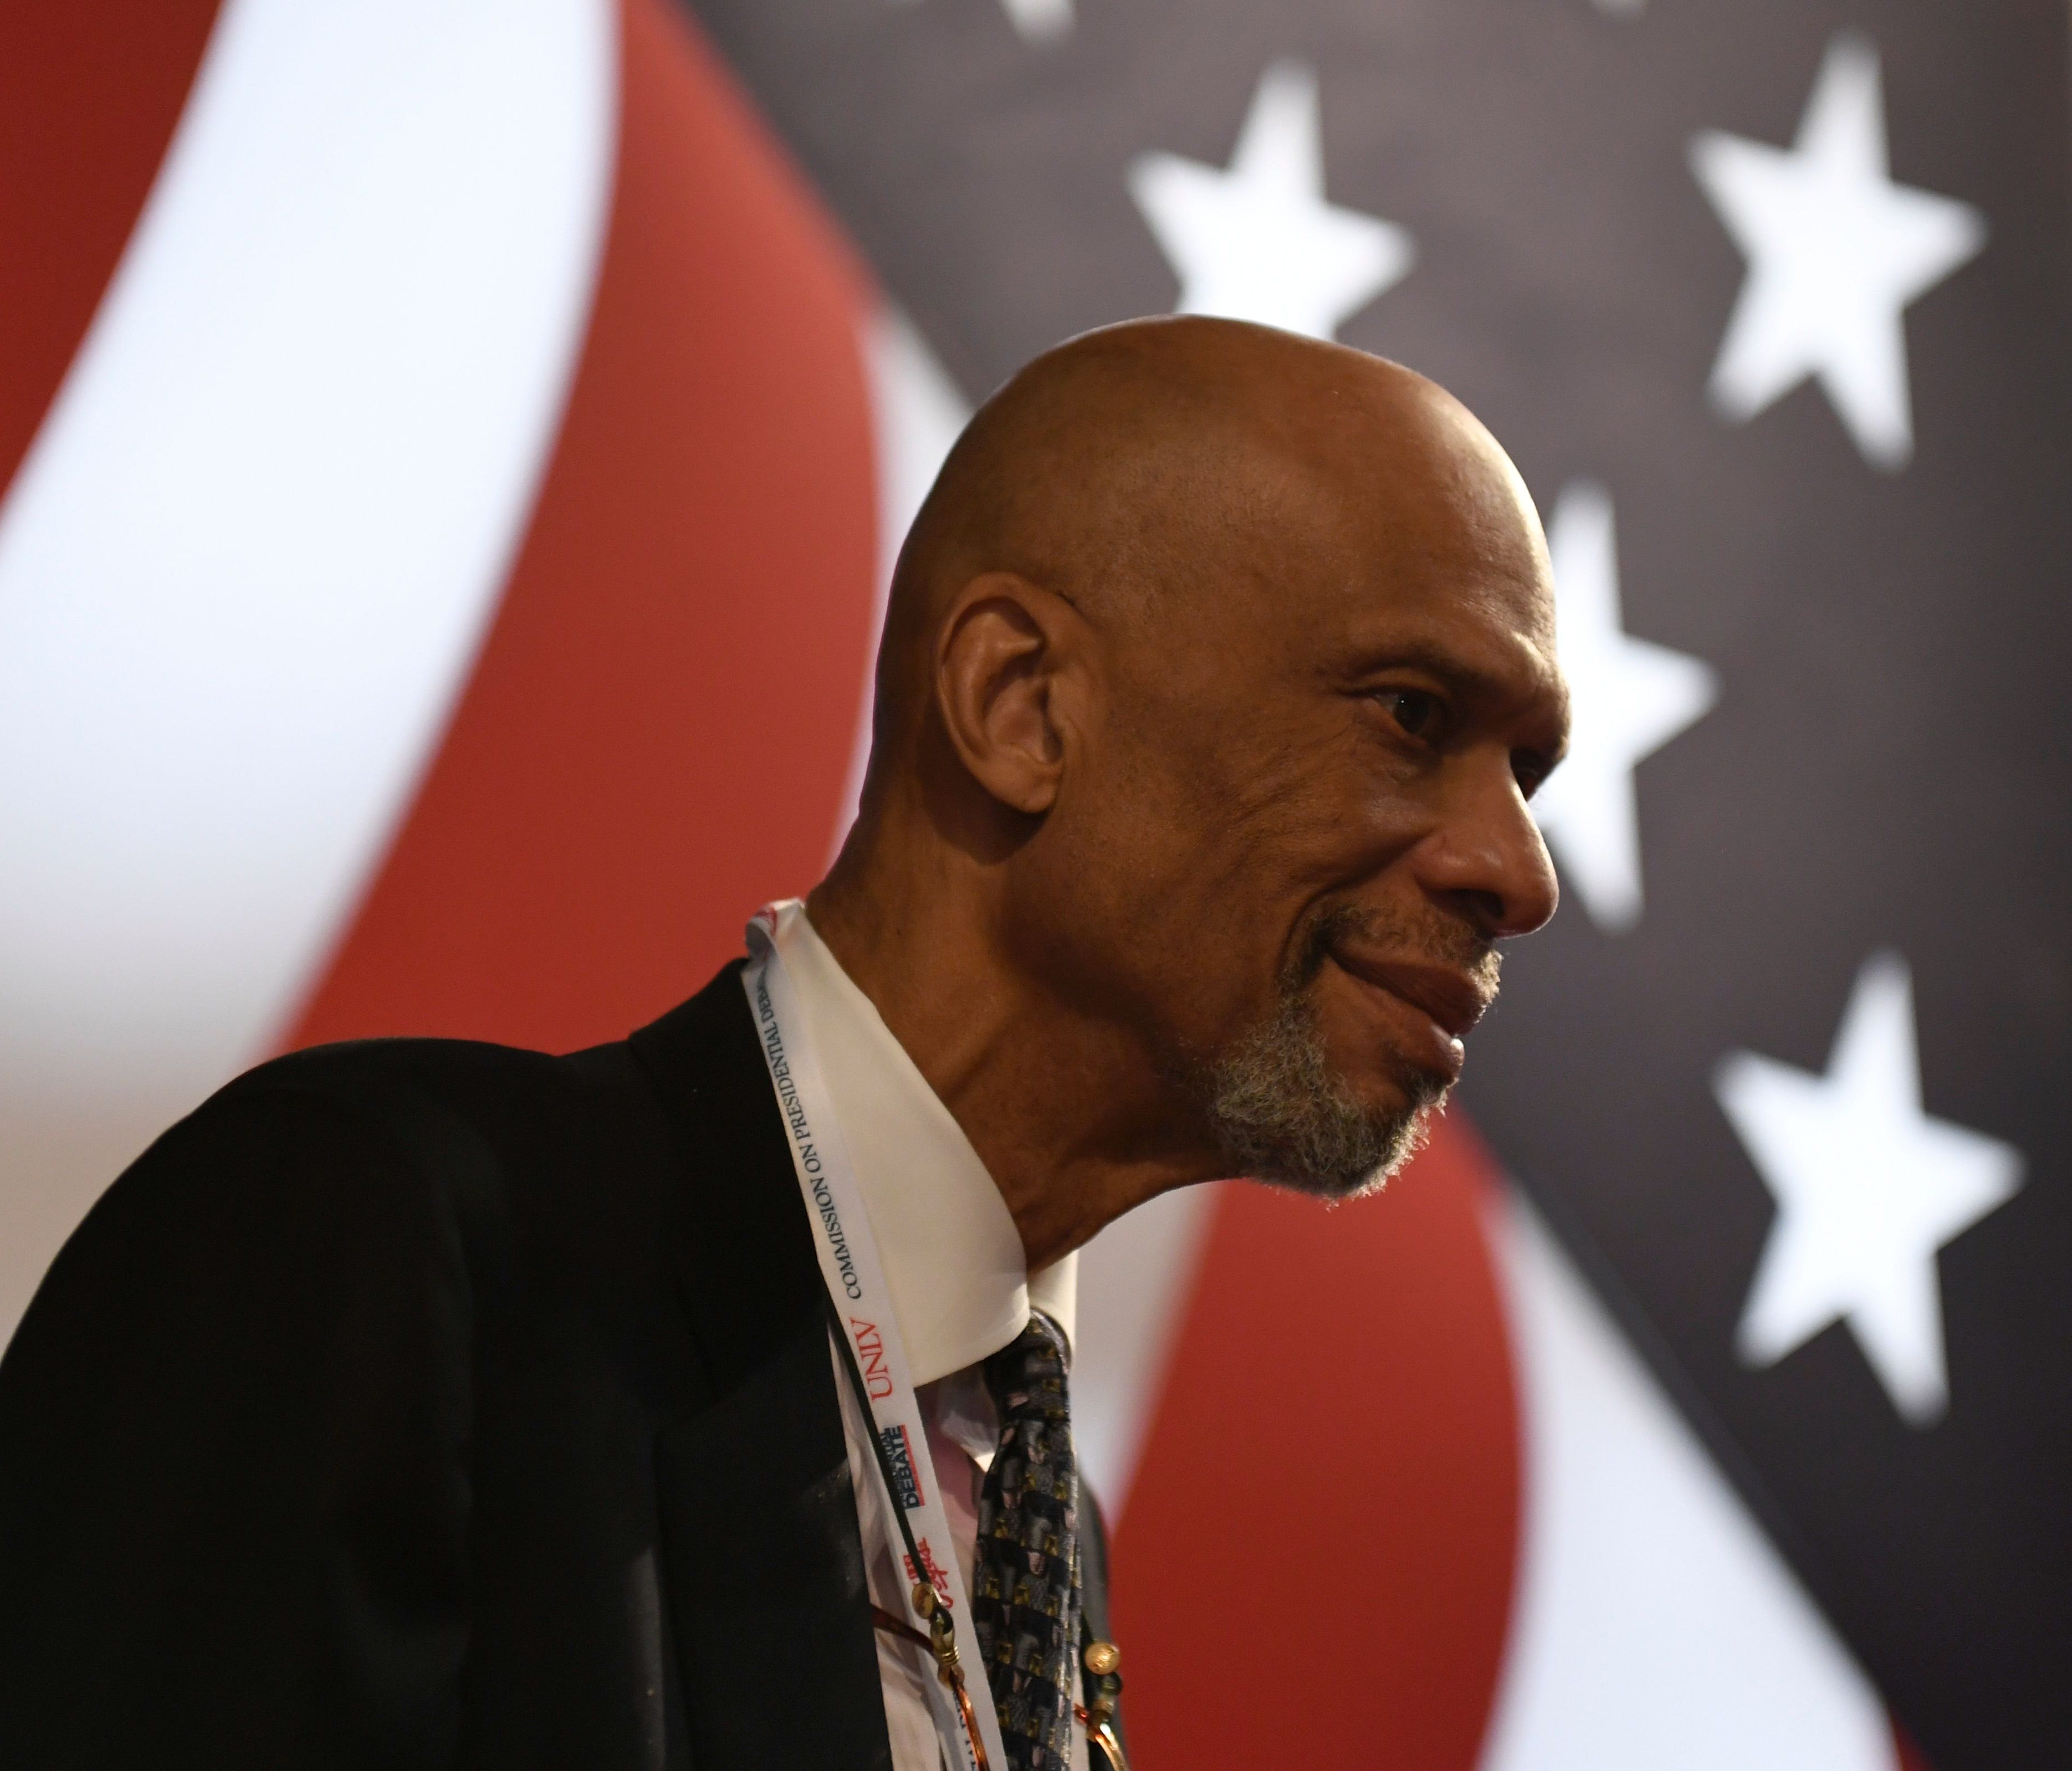 Kareem Abdul-Jabbar says people are upset over players taking a knee because they don't like the message.